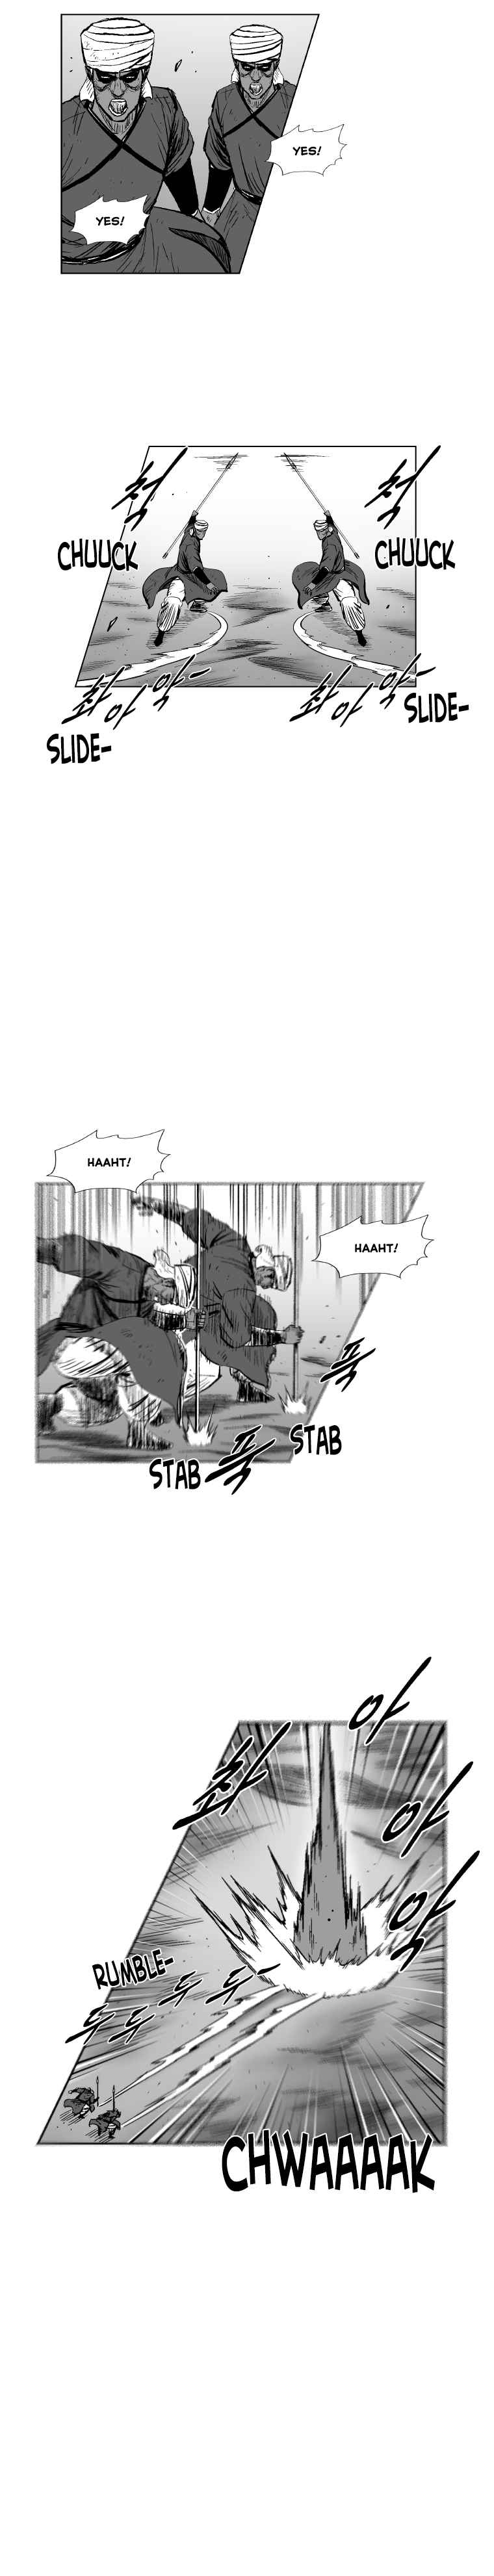 Red Storm Vol. 15 Ch. 296